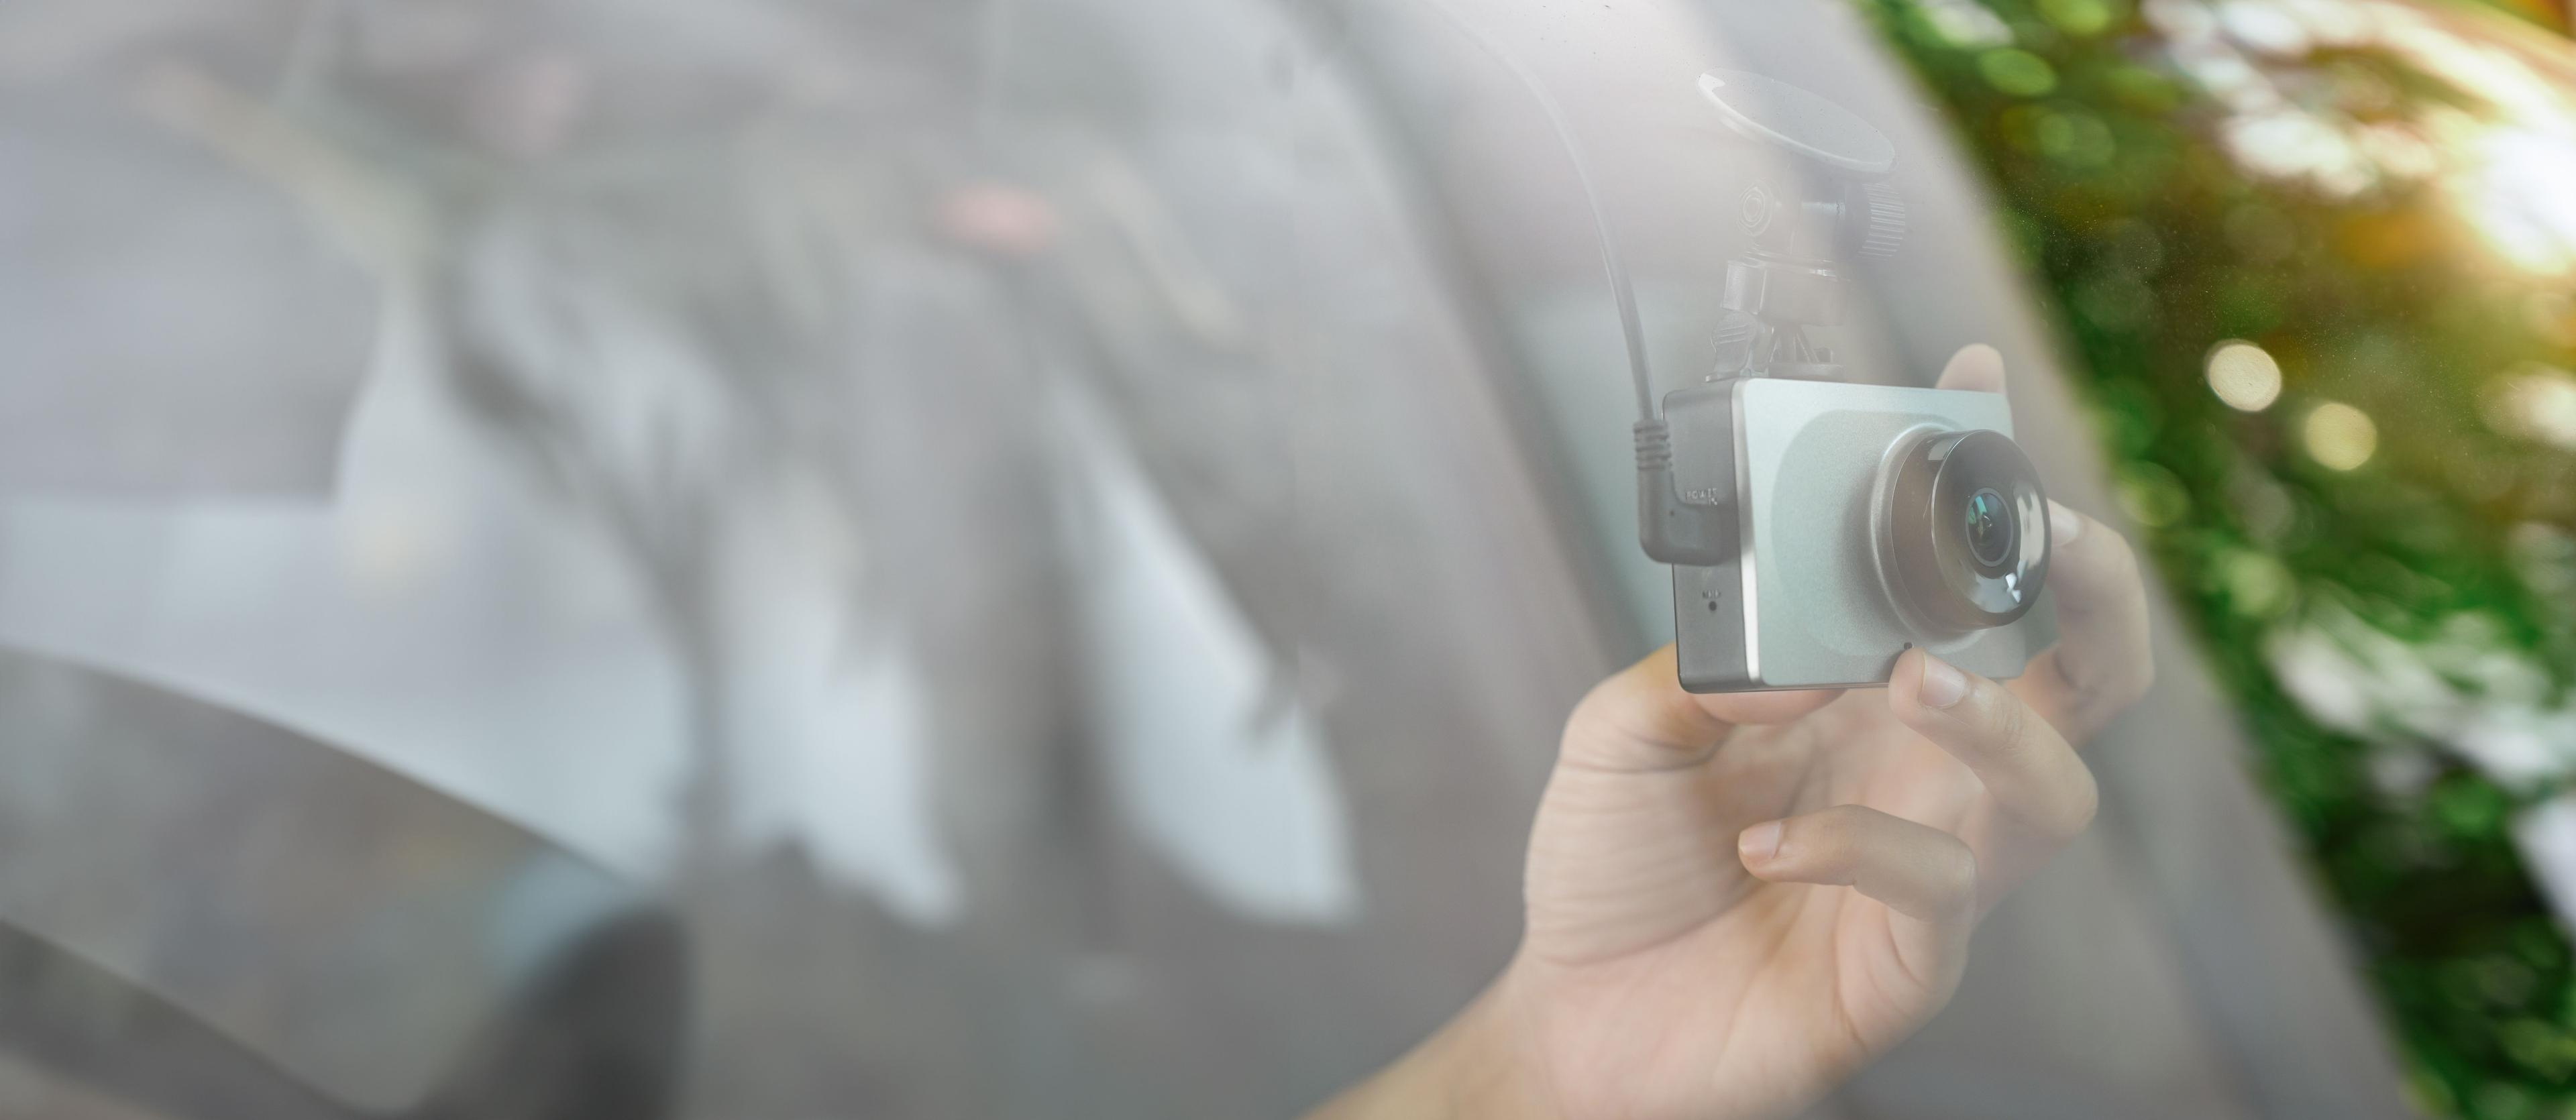 Installing a dashcam to the front windscreen of a vehicle